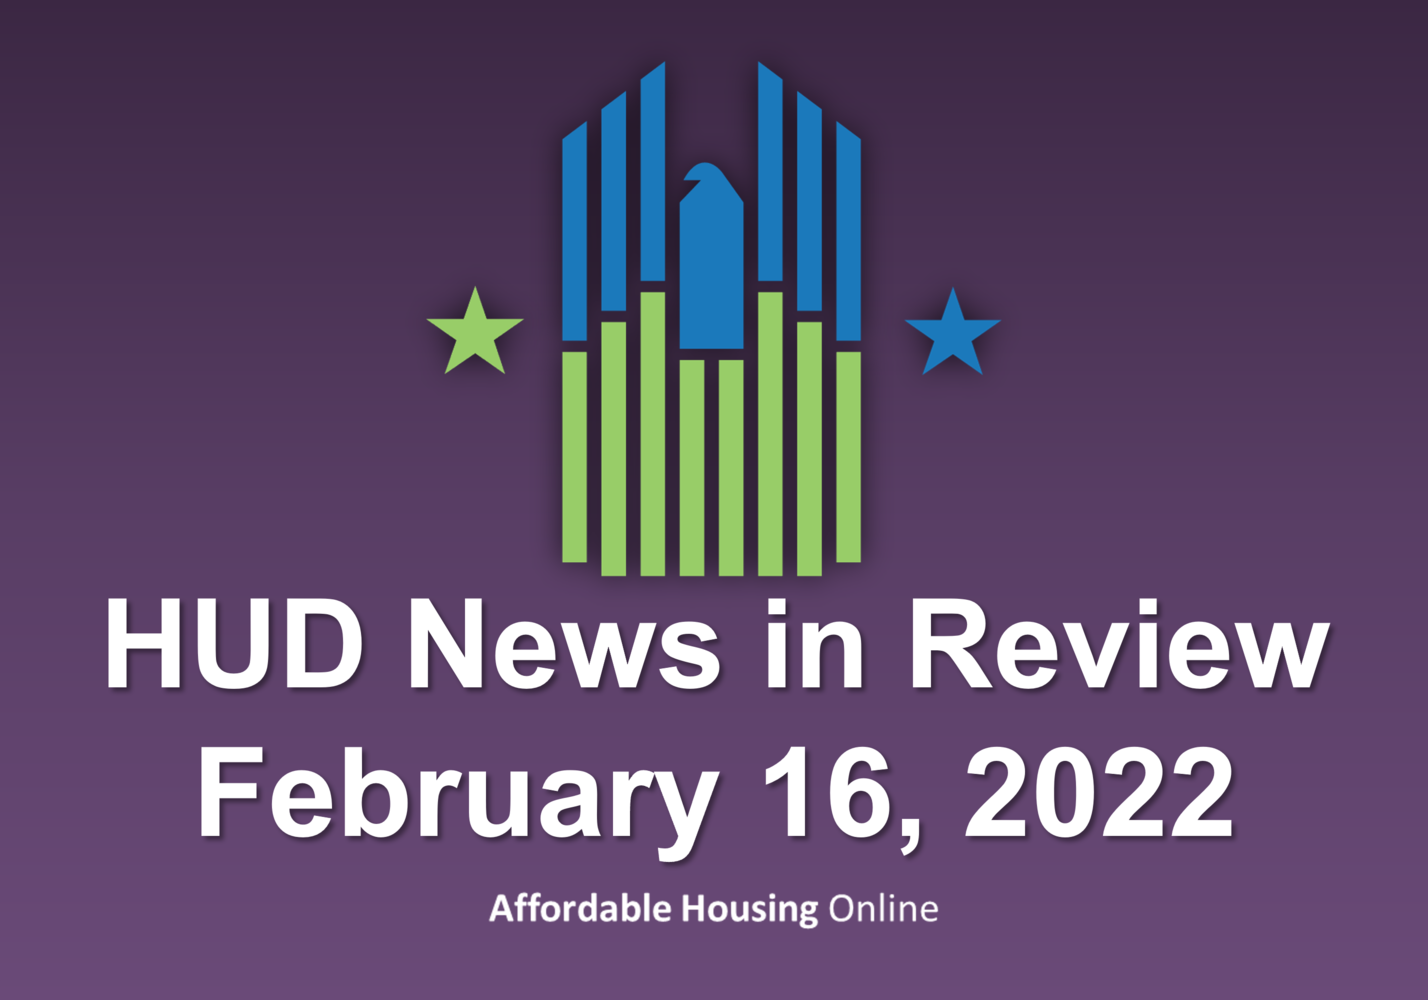 HUD News in Review: February 16, 2022